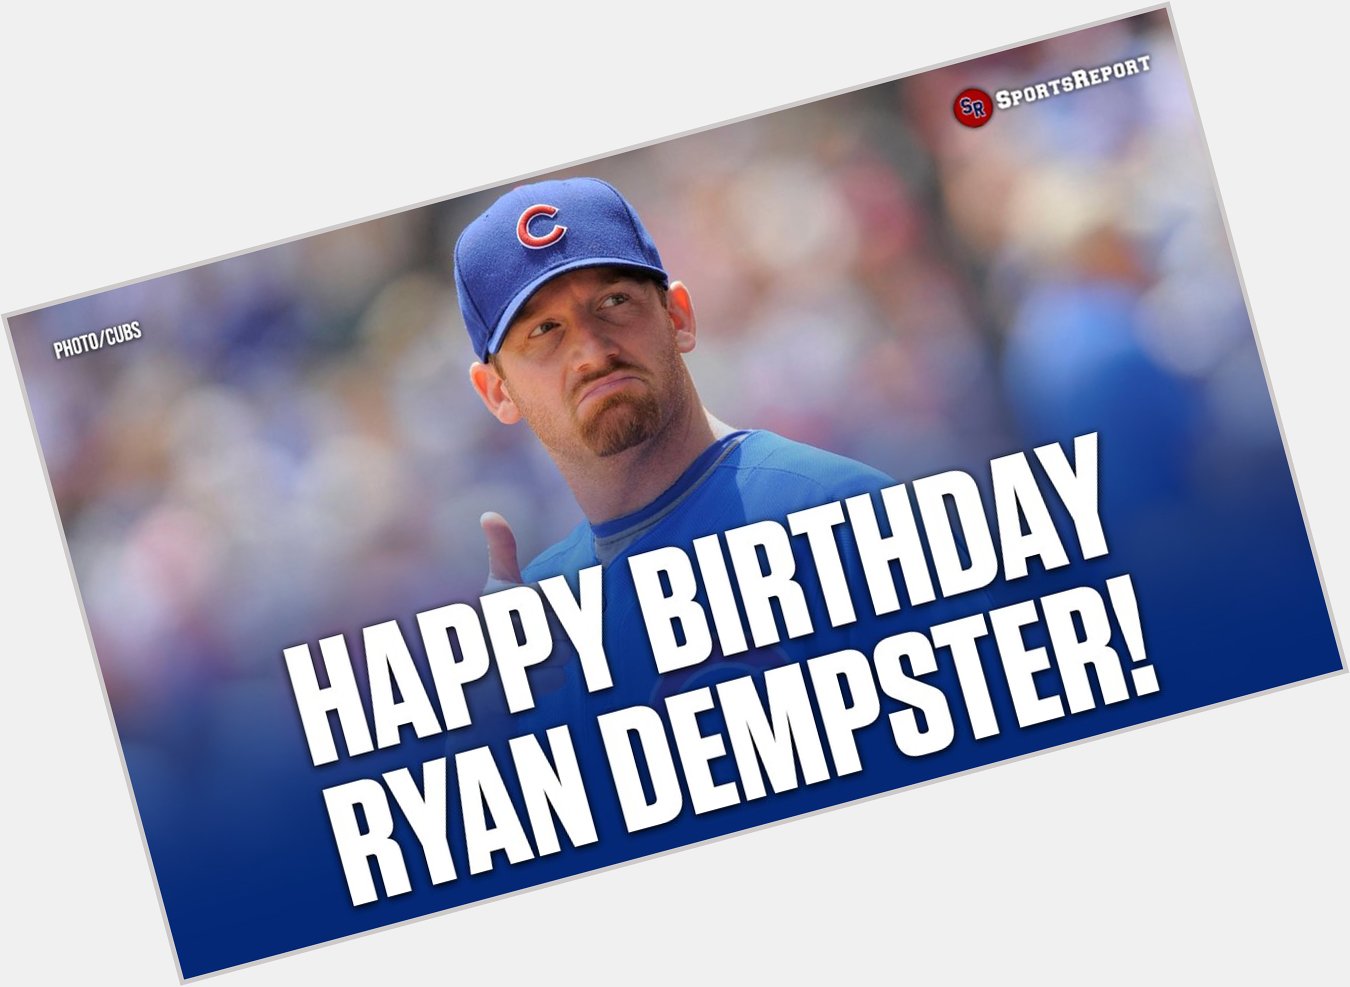  Fans, let\s wish Cubs great Ryan Dempster a Happy Birthday! 